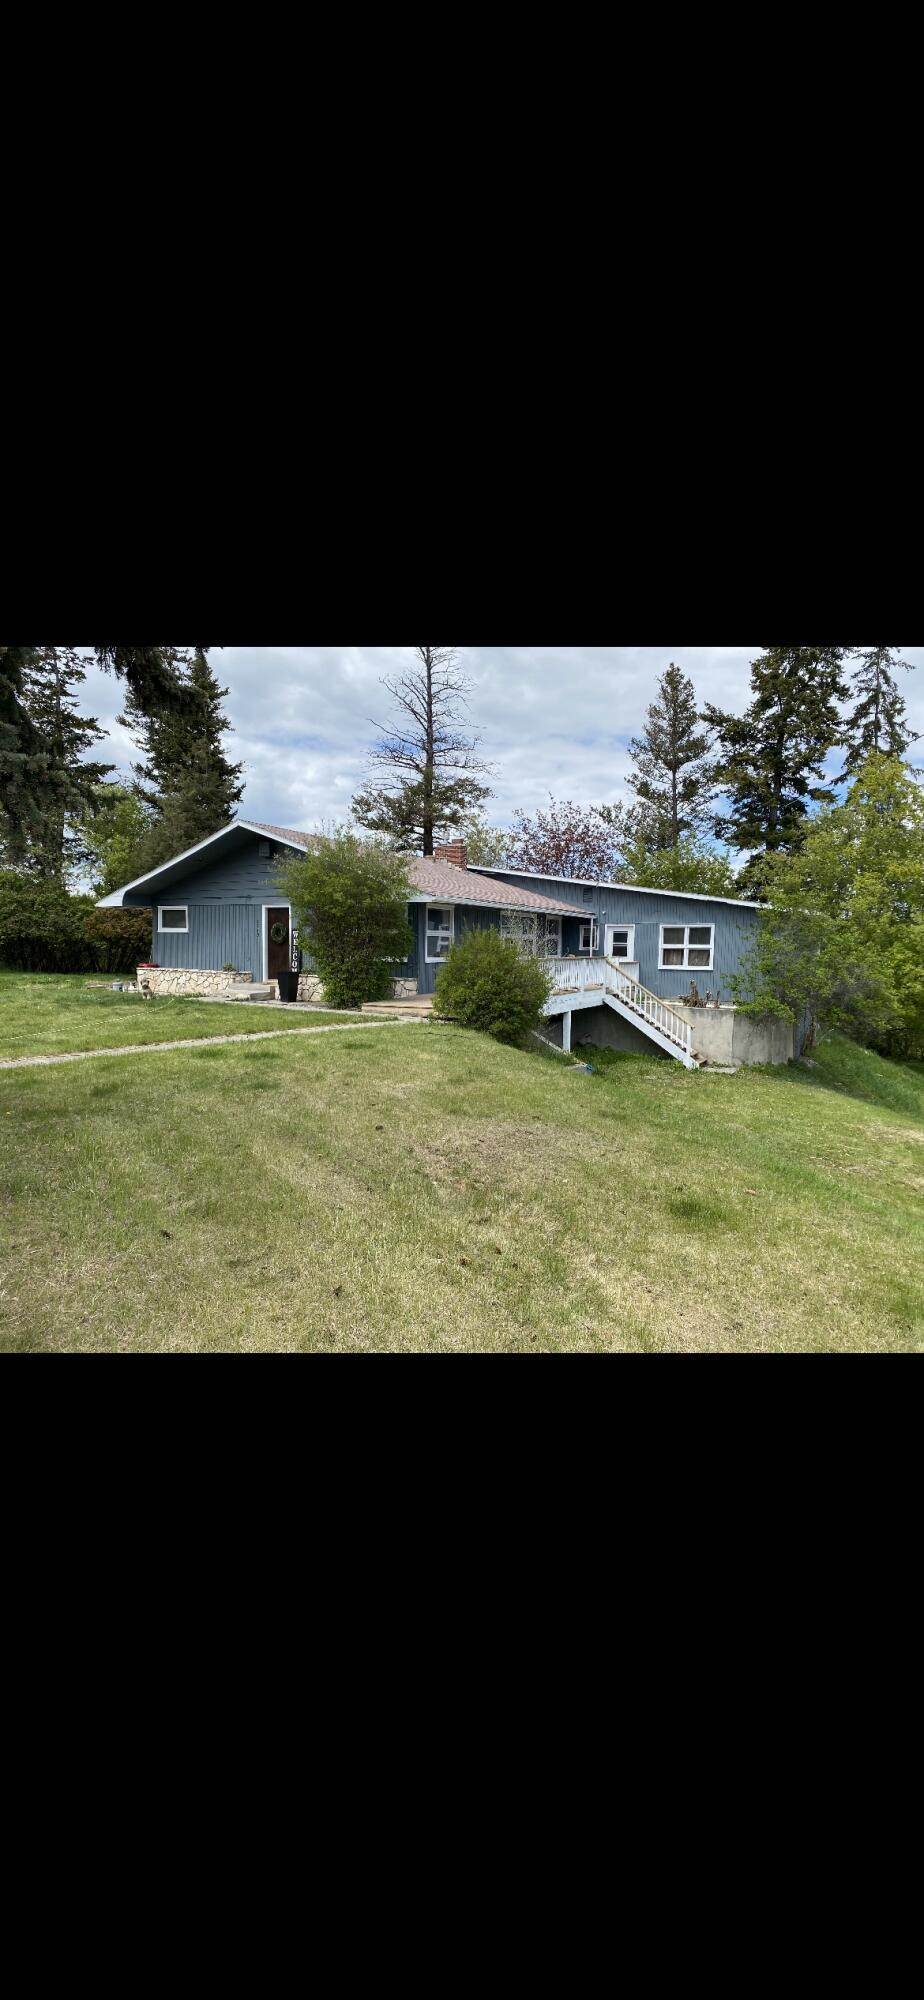 Multi-Family Homes for Sale at 1749 Woodland Avenue, Kalispell, Montana 59901 United States